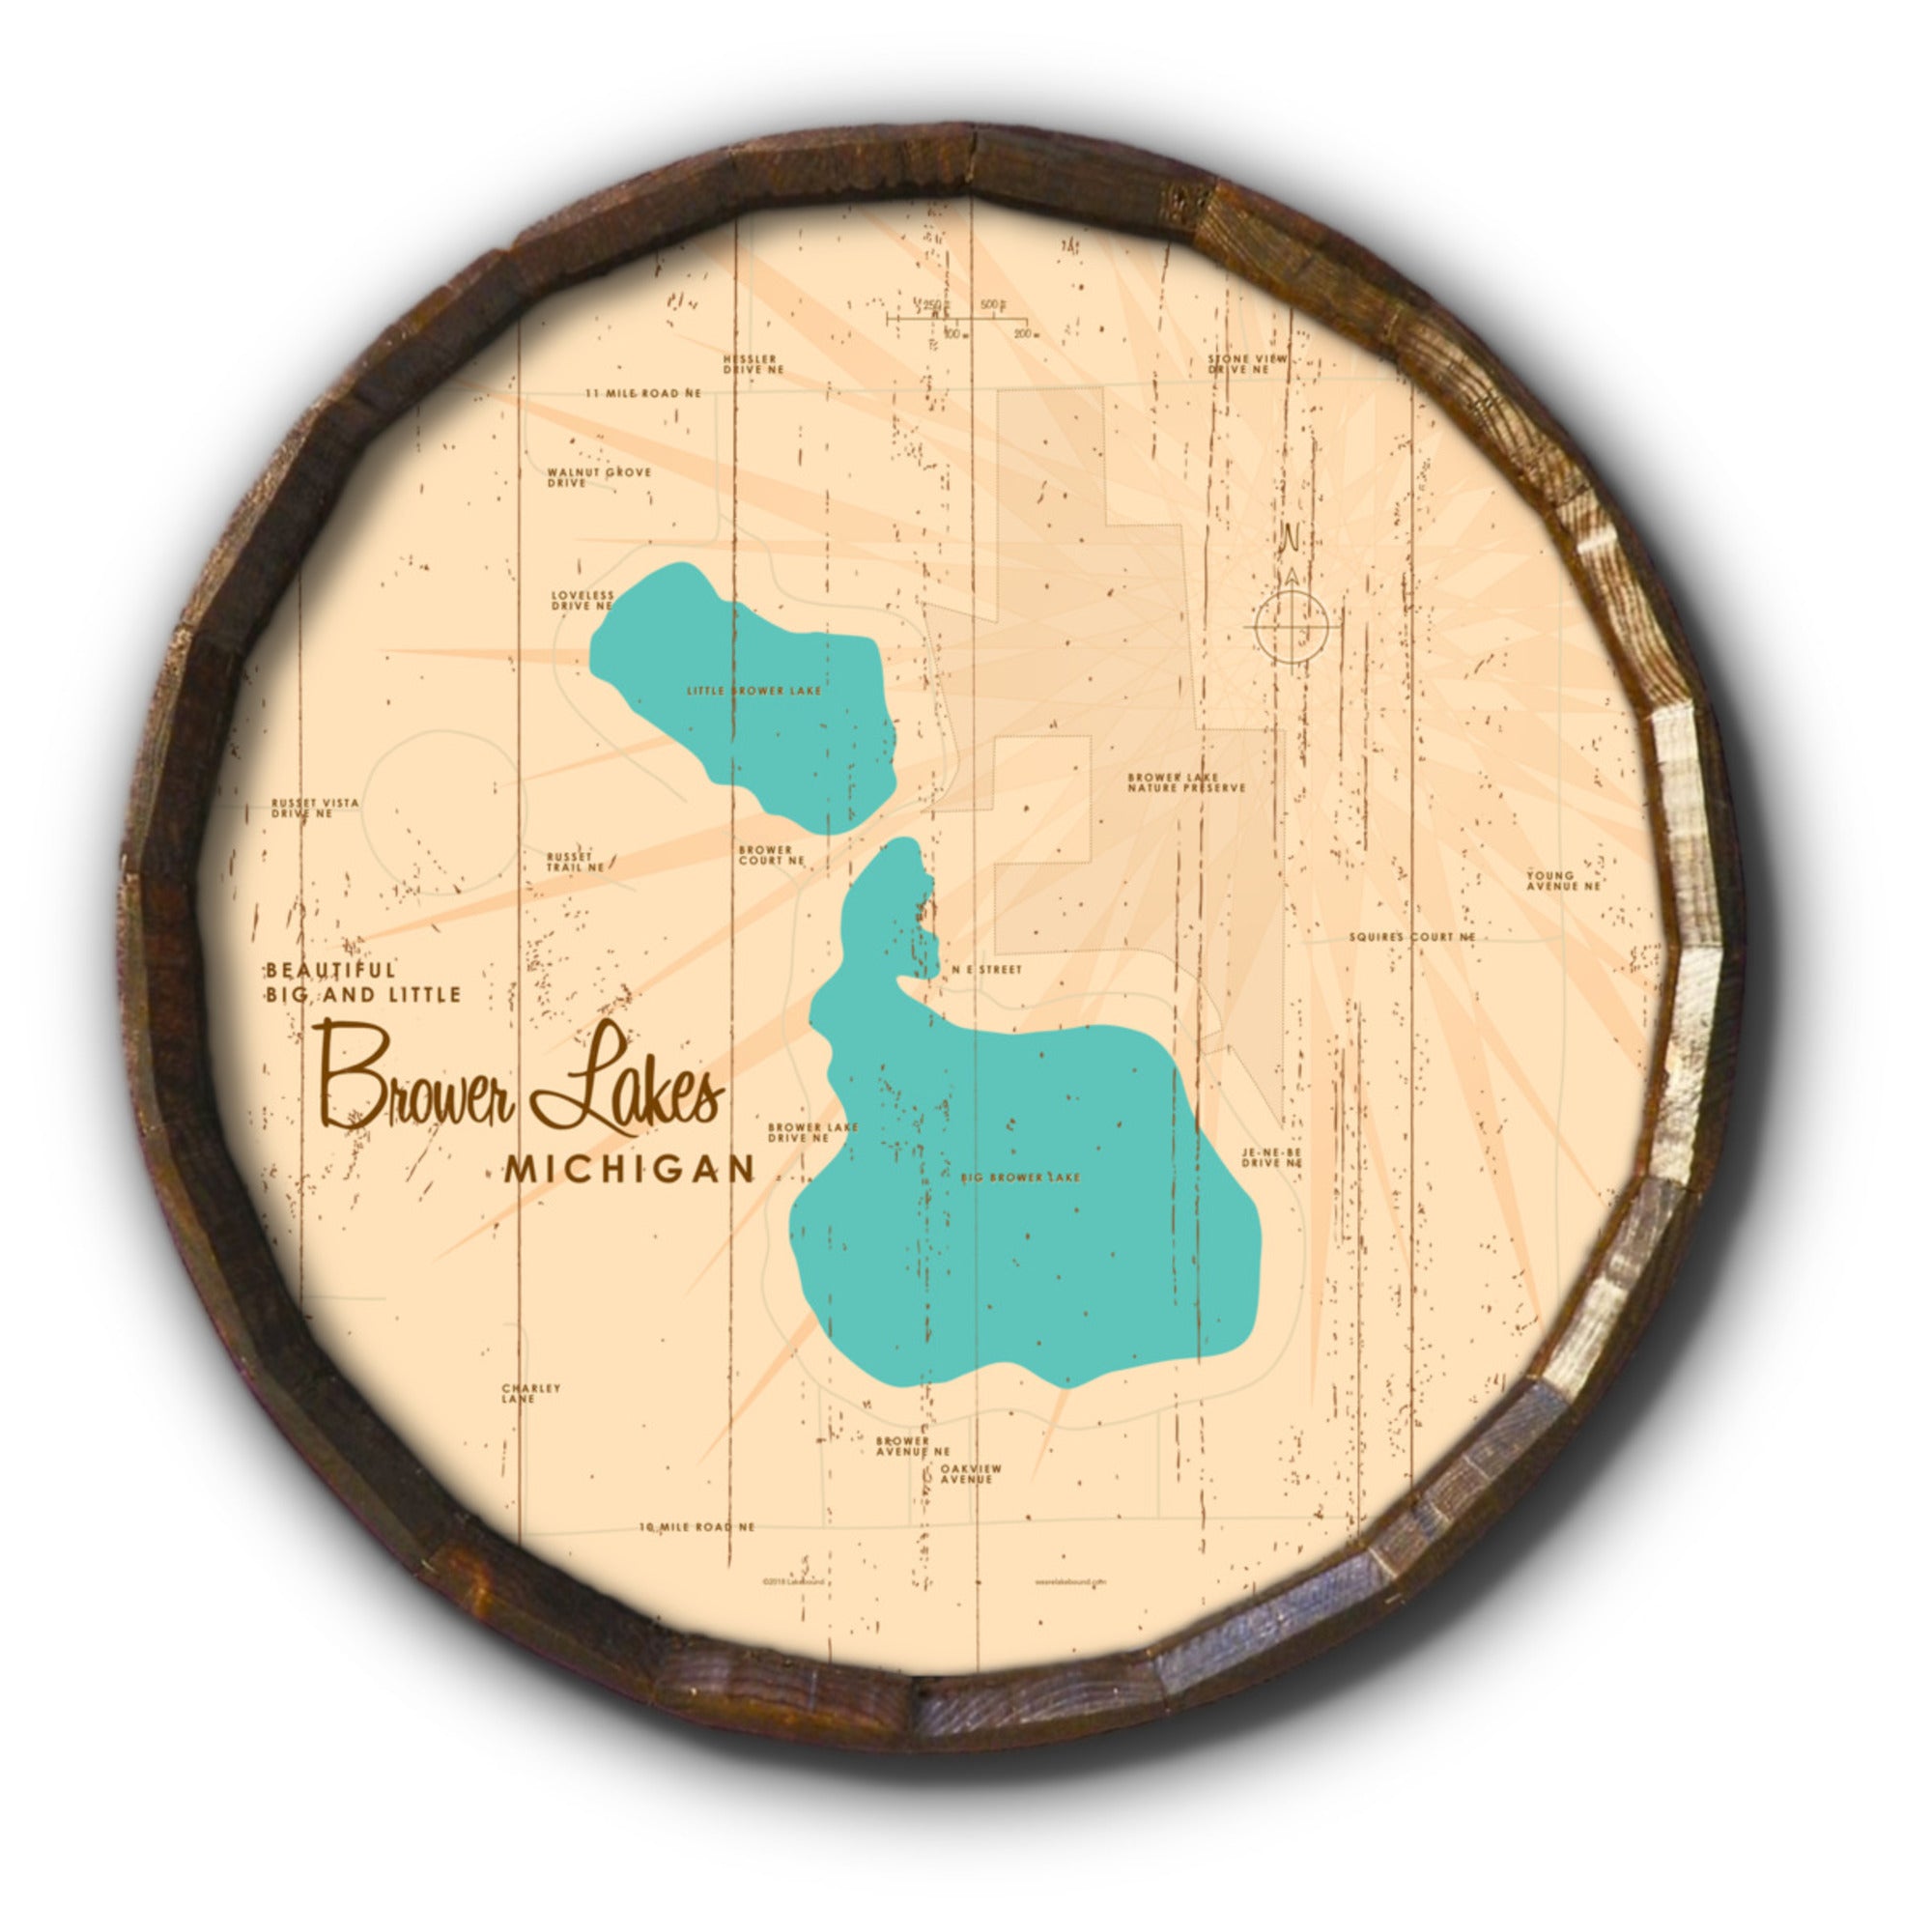 Big and Little Brower Lakes Michigan, Rustic Barrel End Map Art